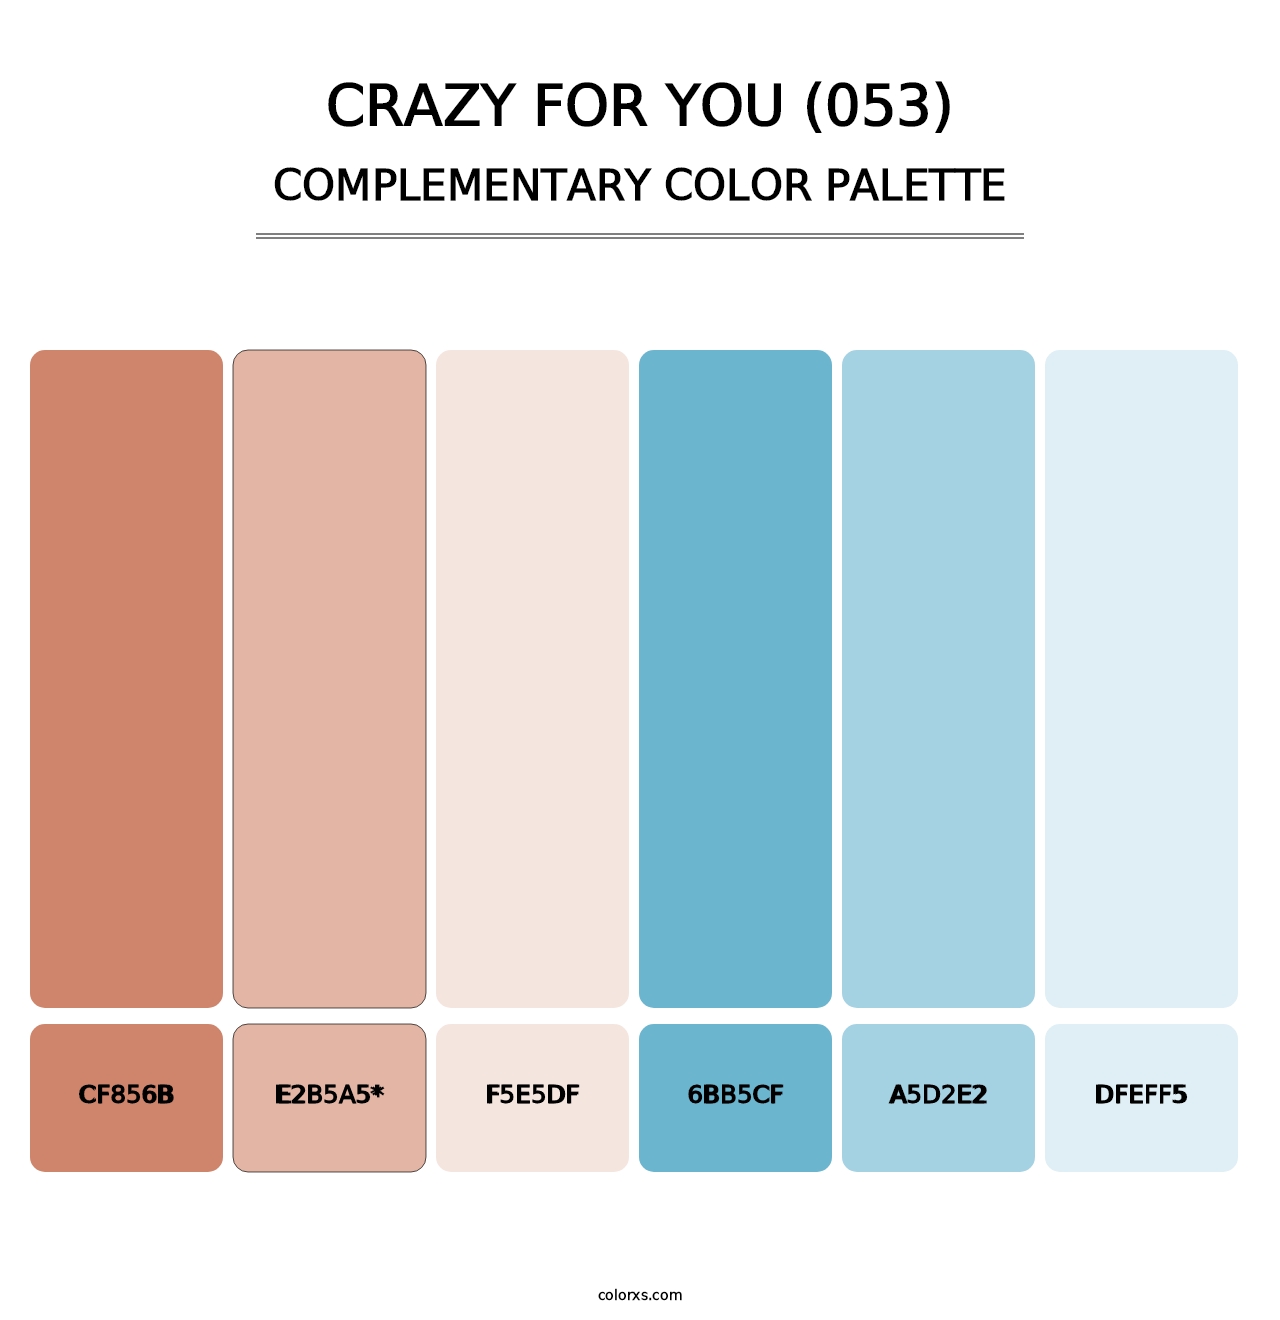 Crazy For You (053) - Complementary Color Palette